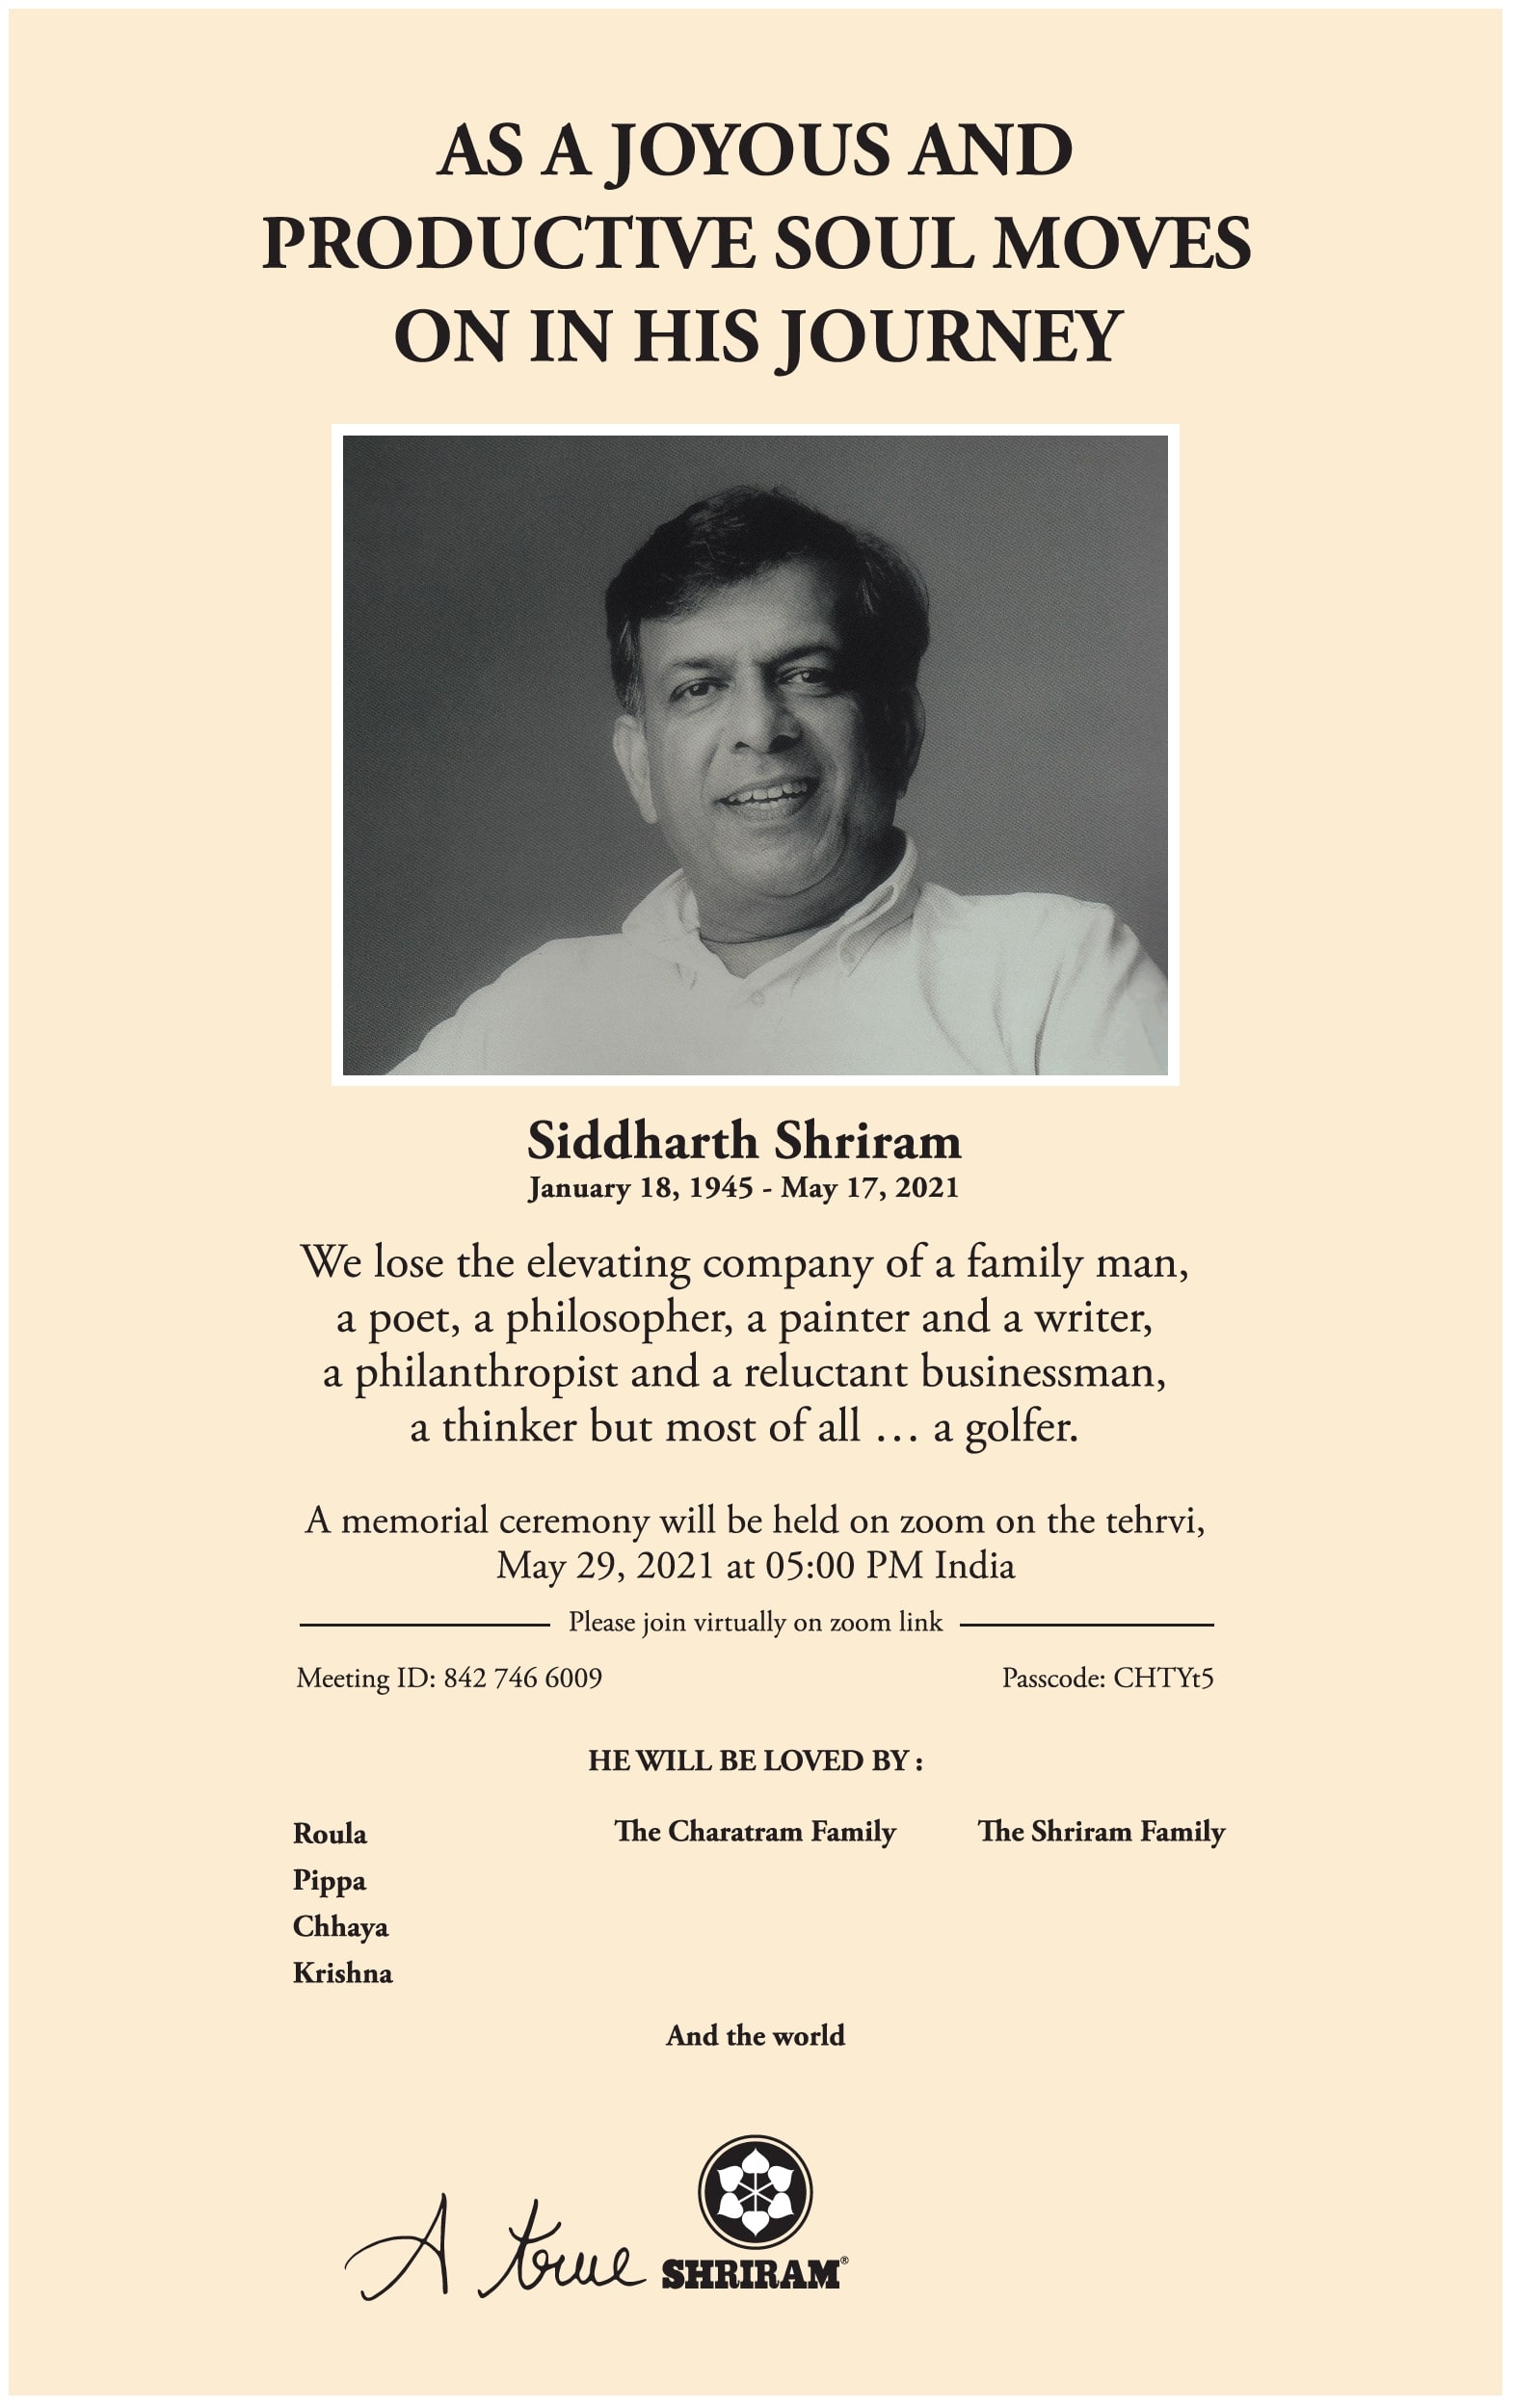 as-a-joyous-and-productive-soul-moves-on-his-journey-siddharth-shriram-ad-times-of-india-delhi-18-05-2021